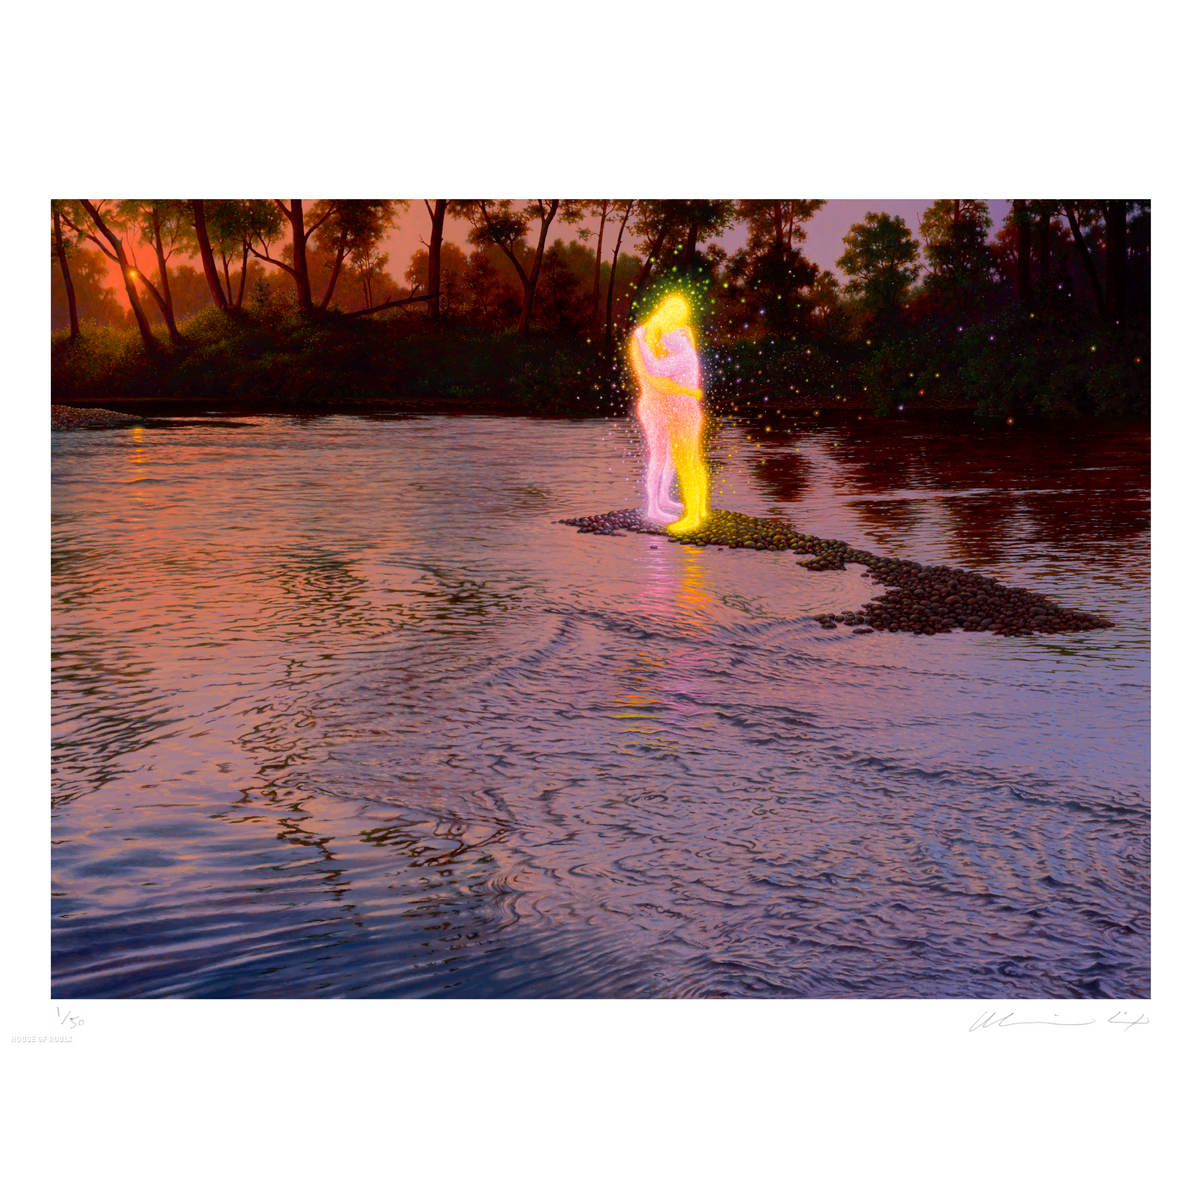 Adrian Cox &quot;The Lost Spectral Witnesses XX (Island)&quot; - Archival Print, Limited Edition of 50 - 18 x 24&quot;